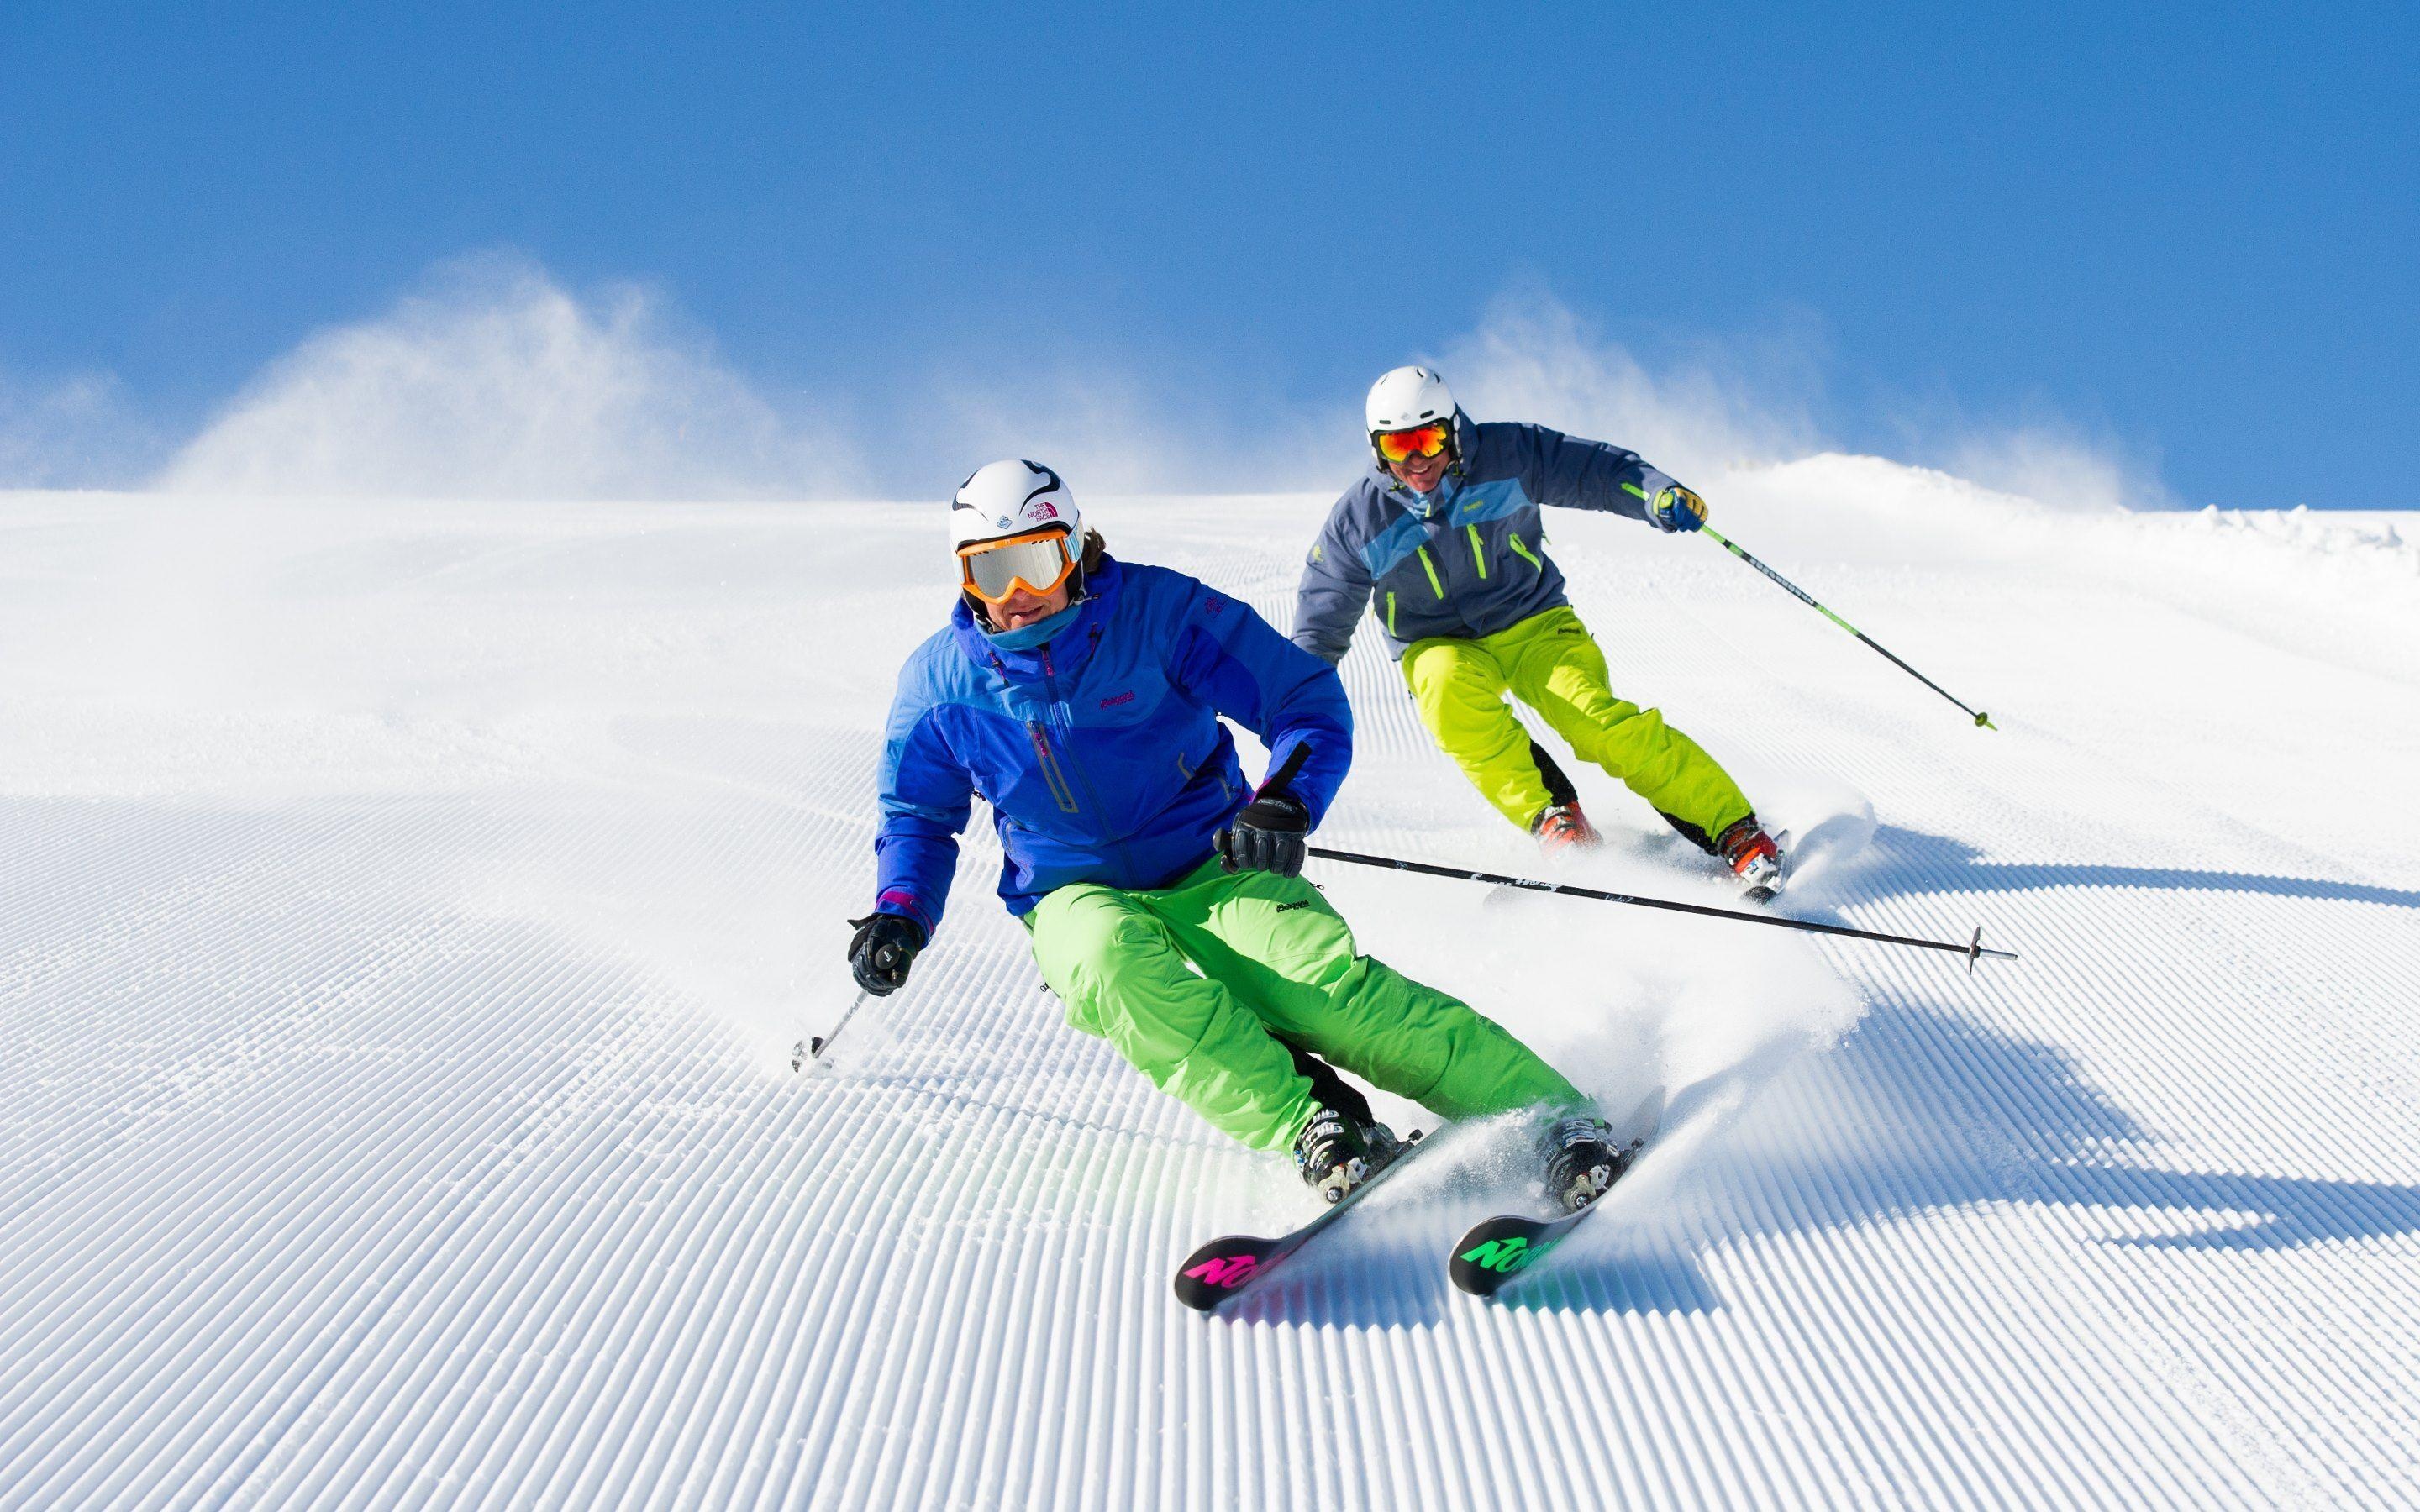 Skiing: The sport of gliding on snow, Downhill, Slalom, Winter activity. 2880x1800 HD Background.